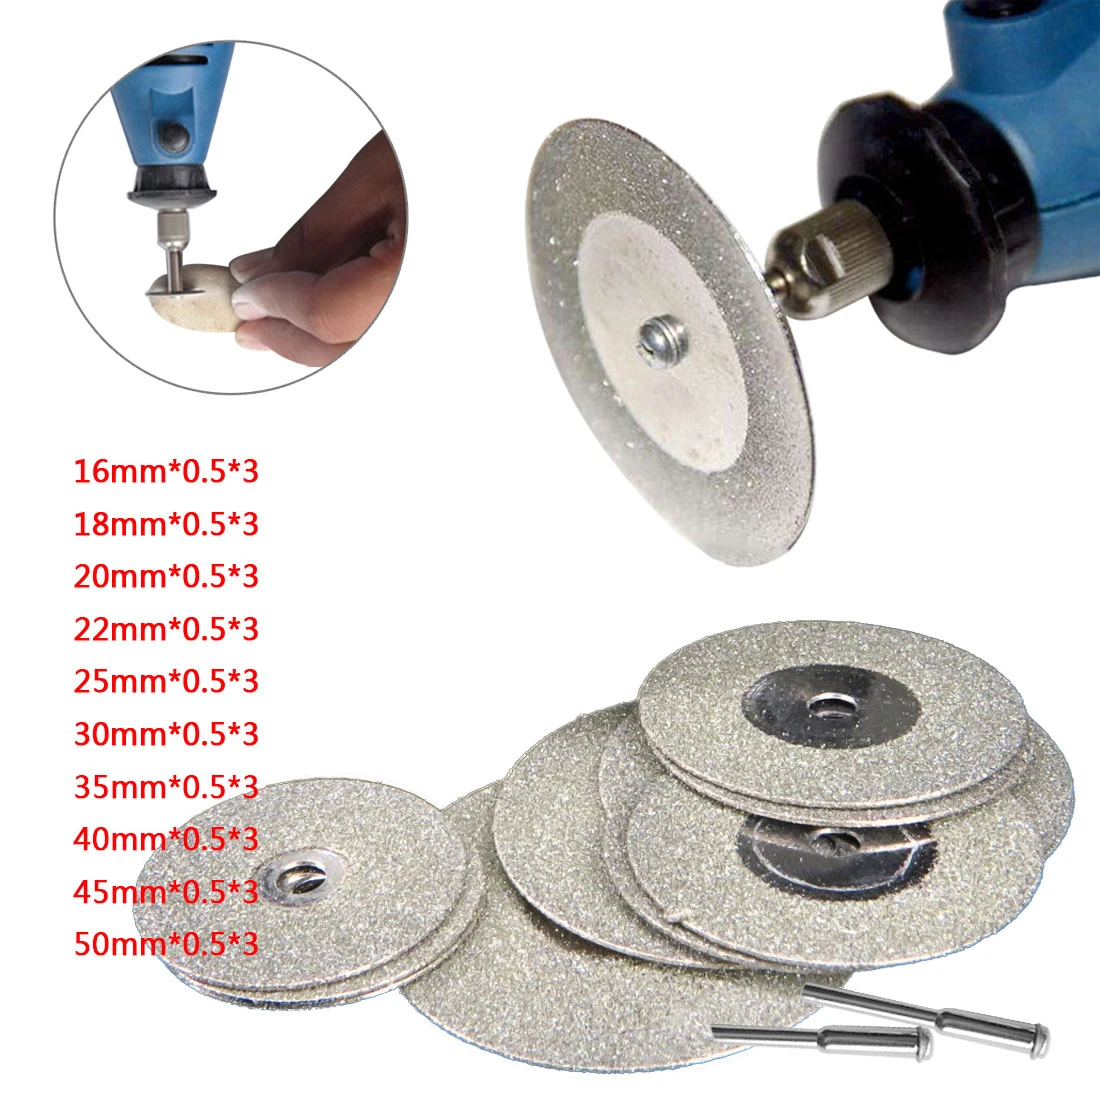 Practical Diamond Saw Cut Off Disc Wheel Blade Rotary Tool 1//8 Shank For Grinder